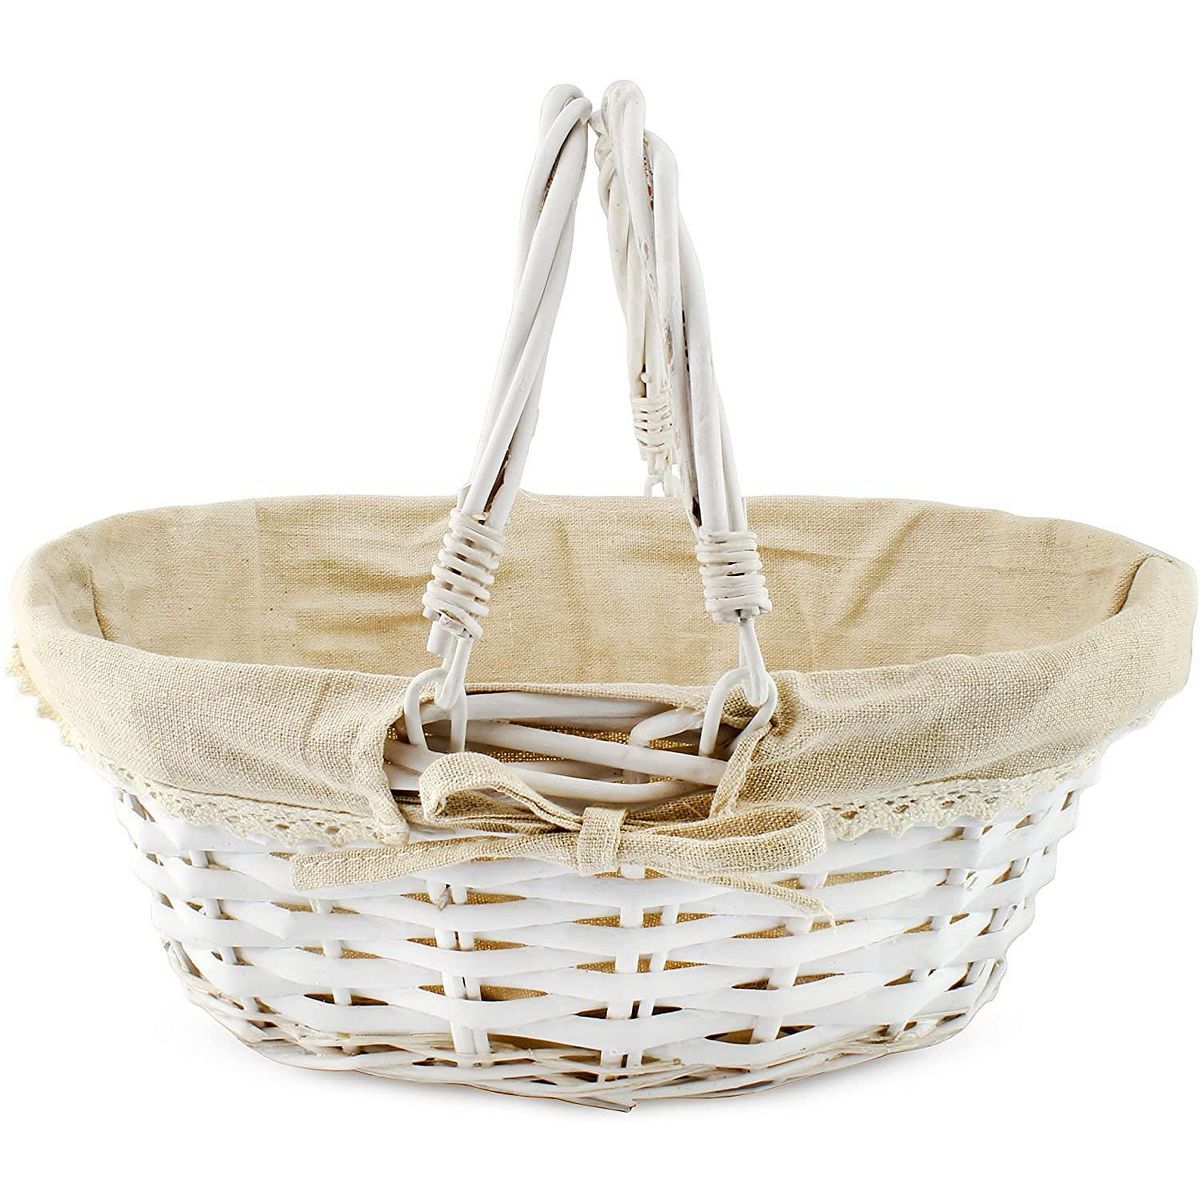 Cornucopia Brands- Wicker Basket with Handles with Cloth Lining | Target